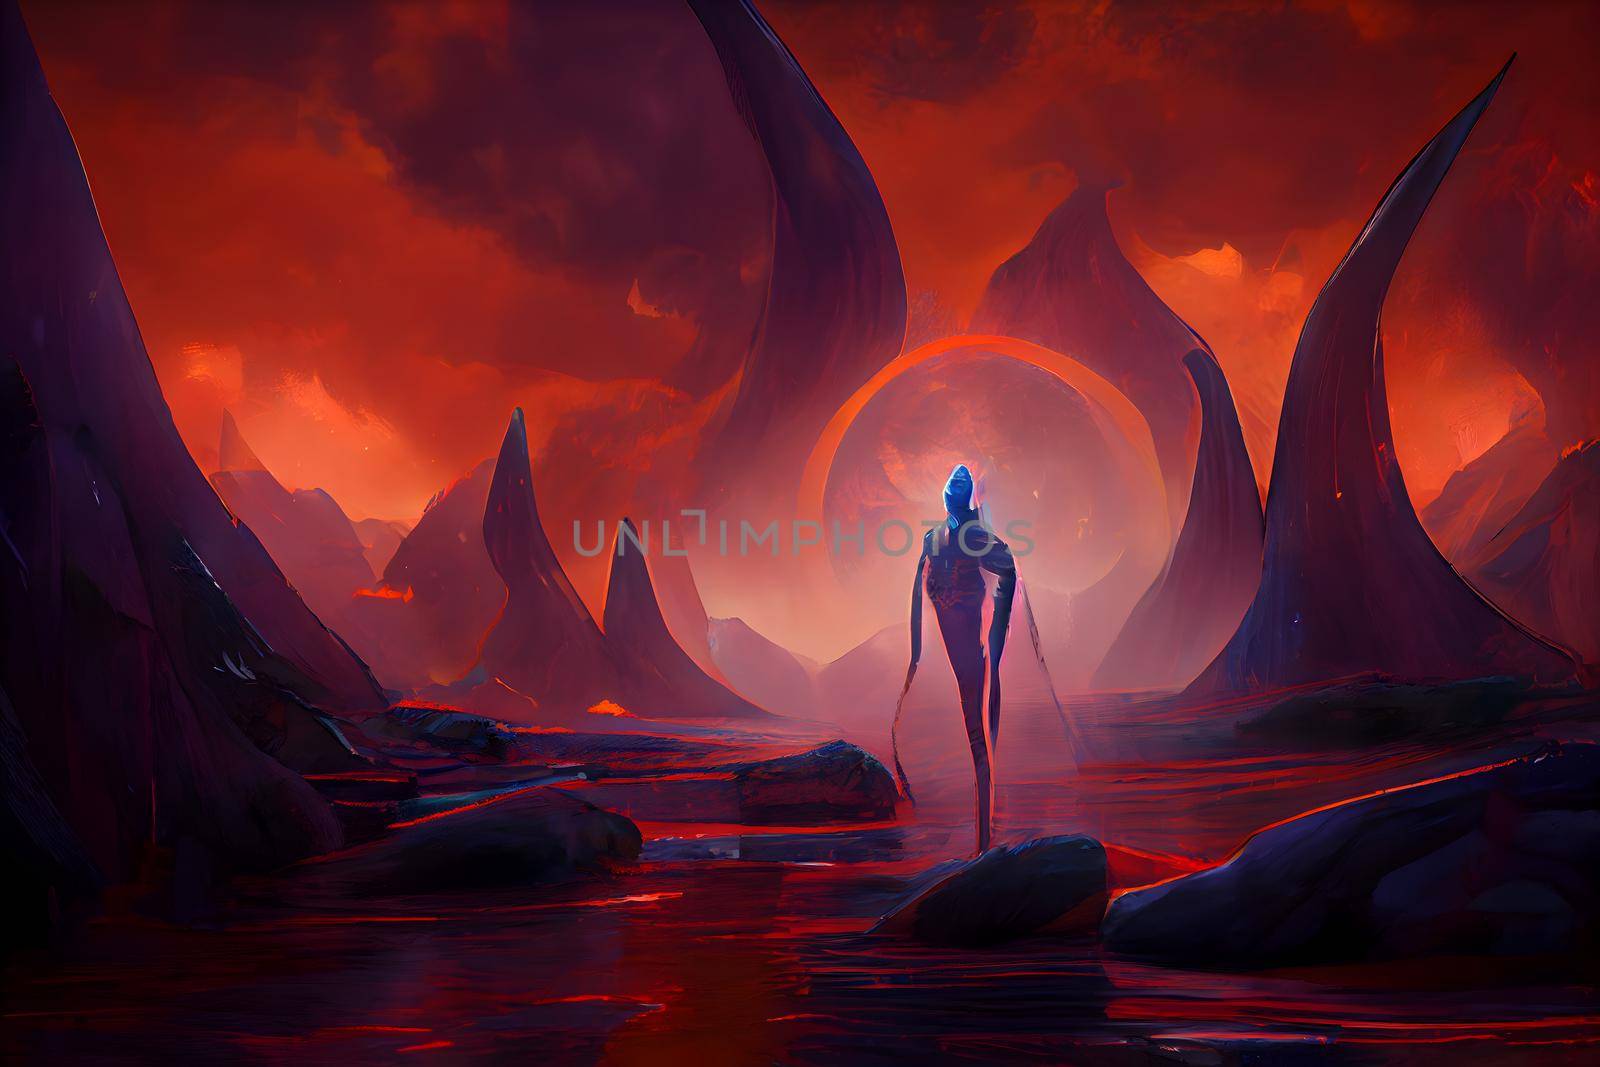 red extraterrestrial landscape with alien being in the center of image, neural network generated art by z1b